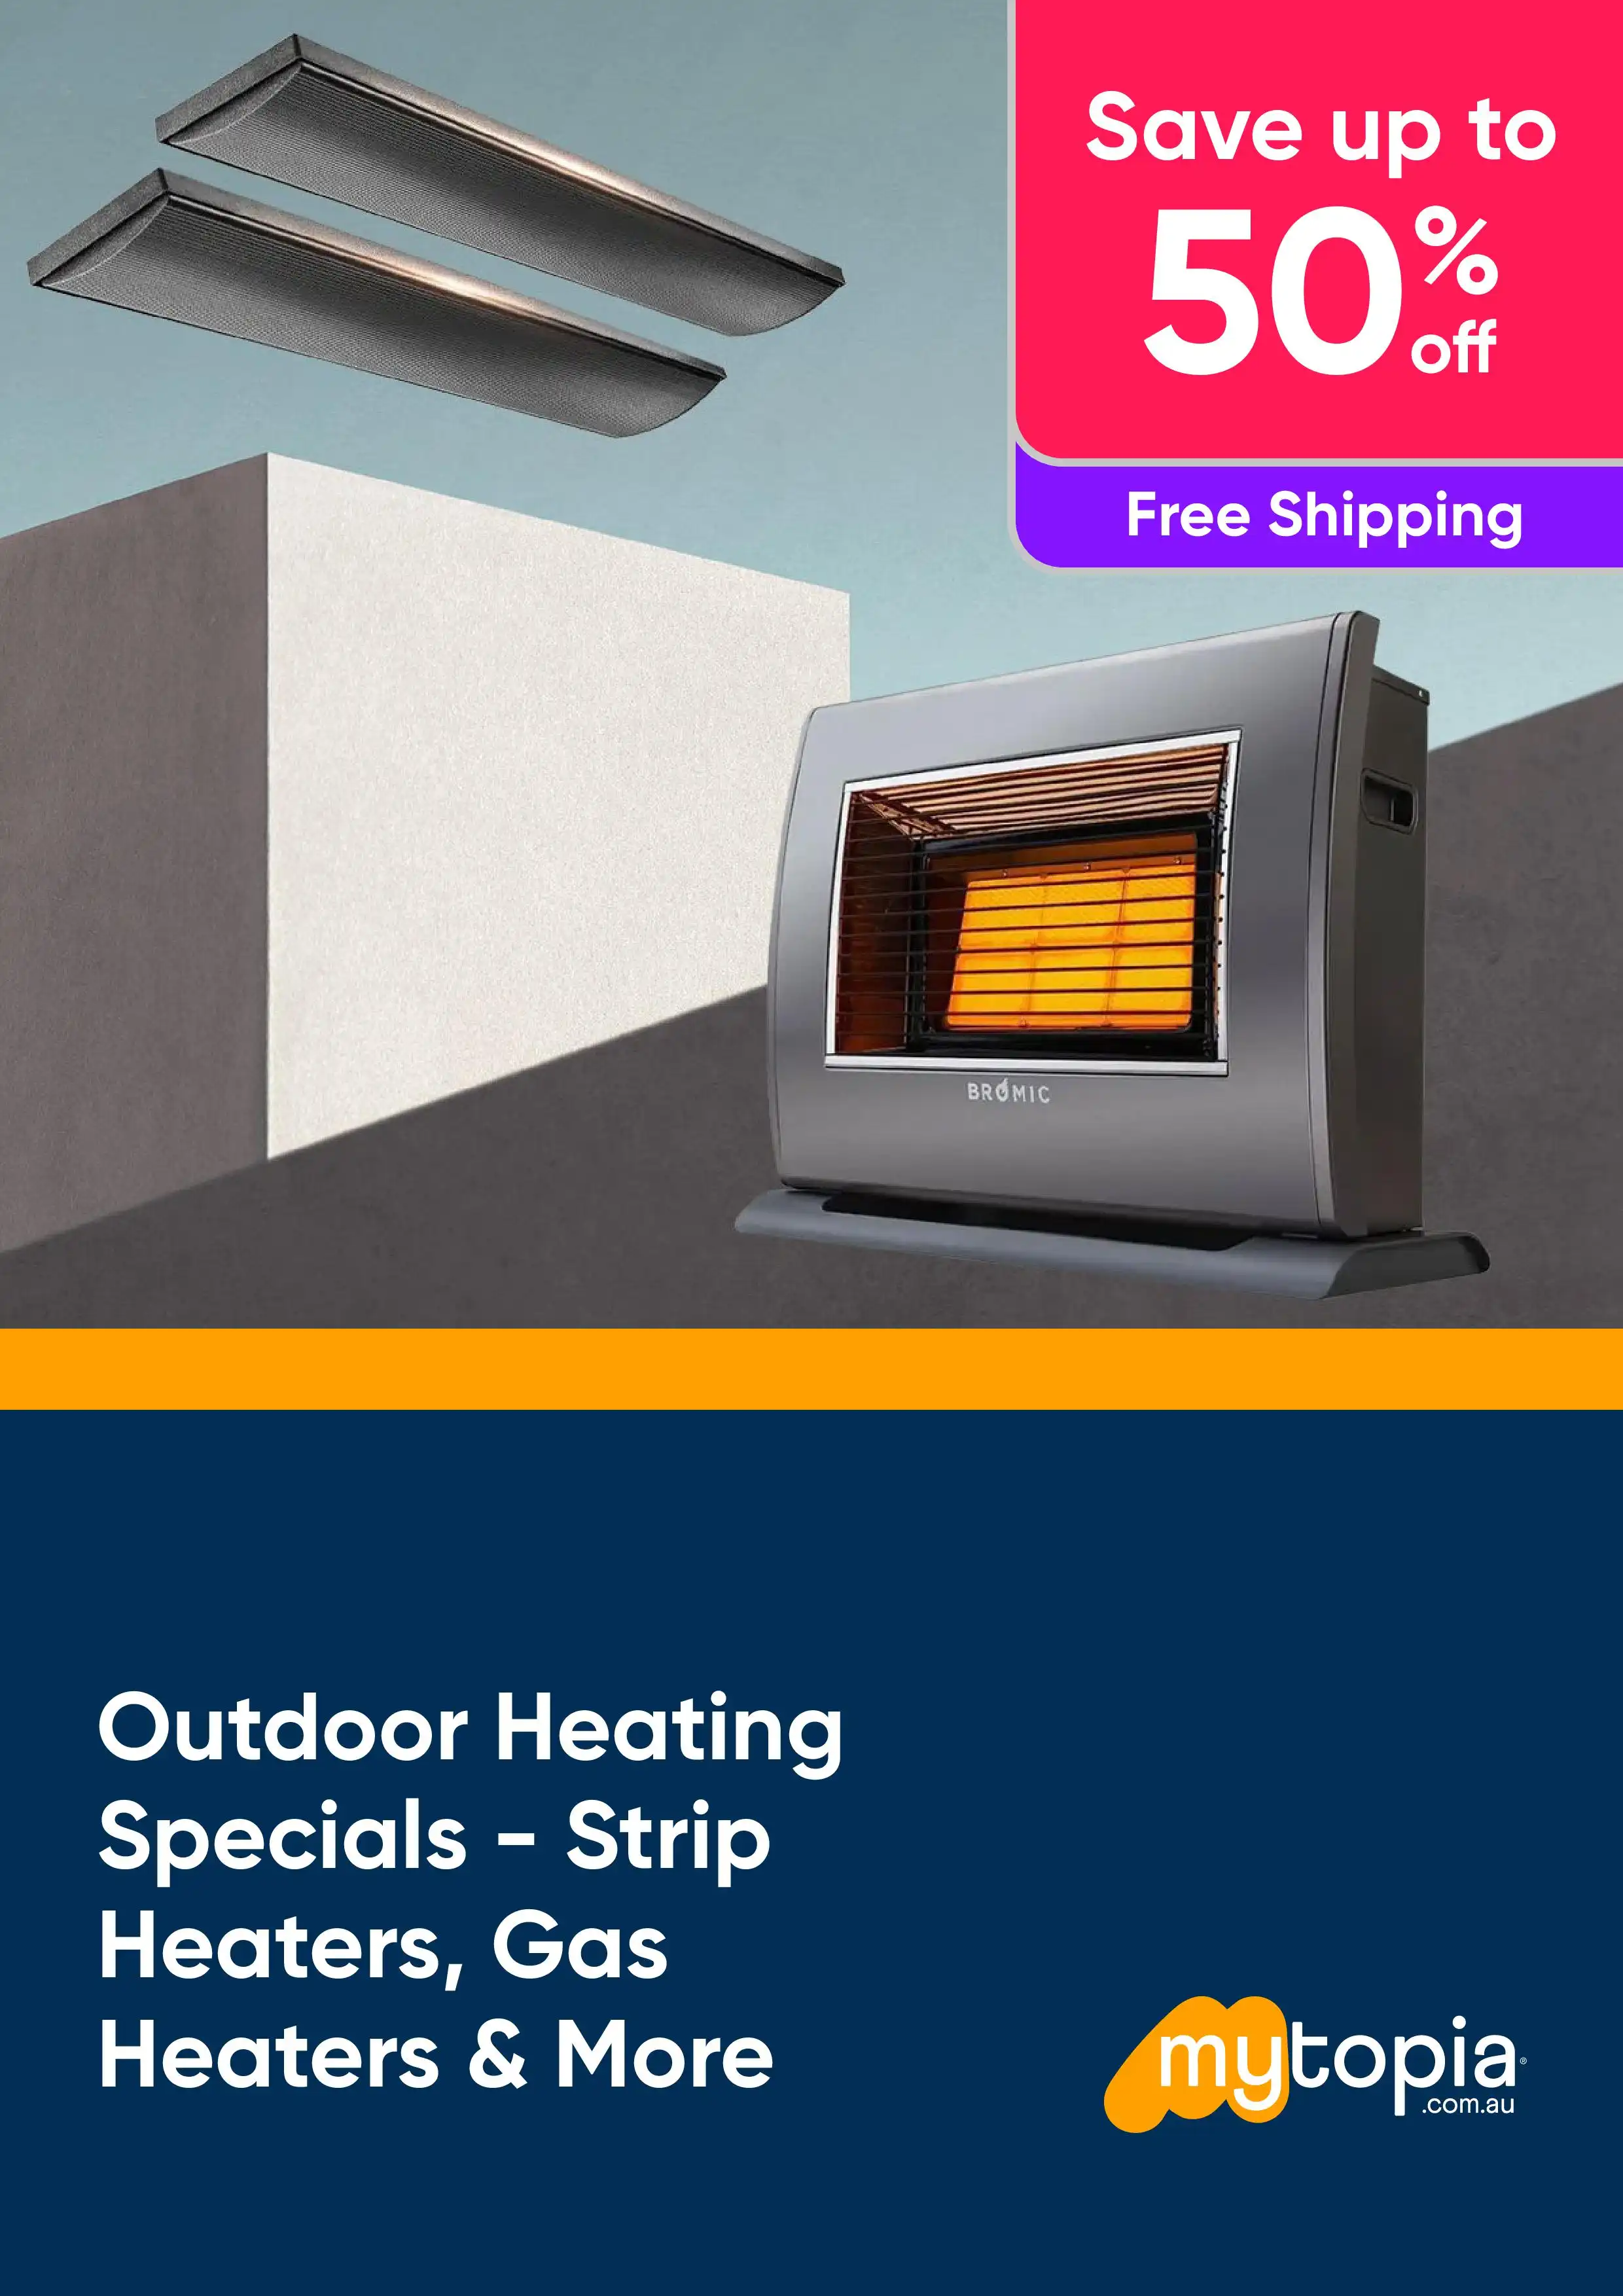 Outdoor Heating Specials - Strip Heaters, Gas Heaters and More - Save Up to 50% Off